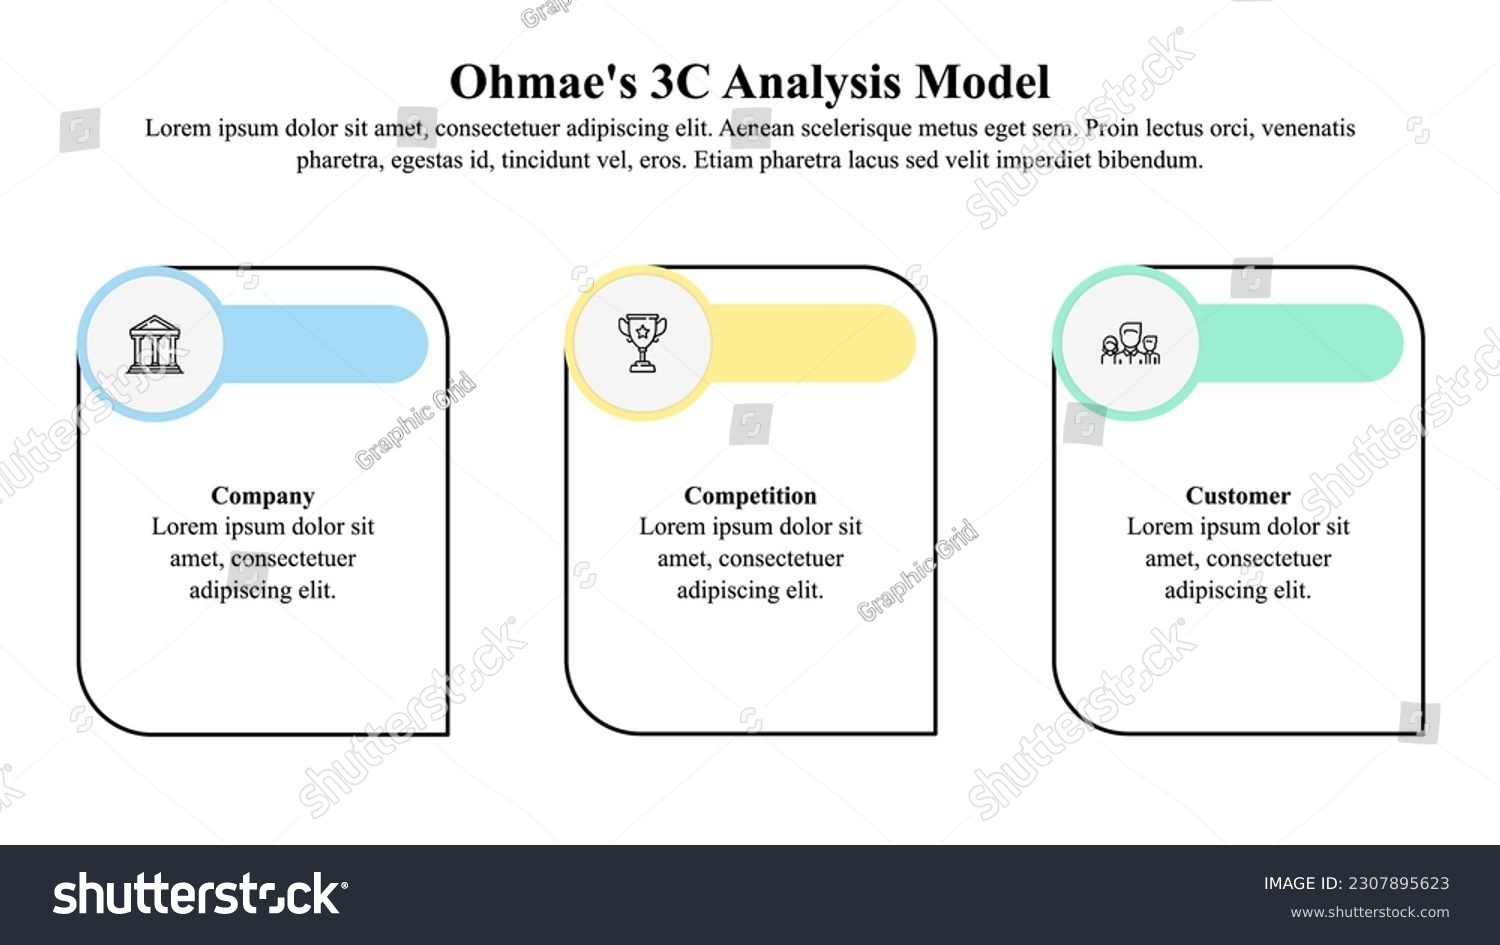 Infographic Presentation Template Of Ohmaes 3c Royalty Free Stock Vector 2307895623 6139